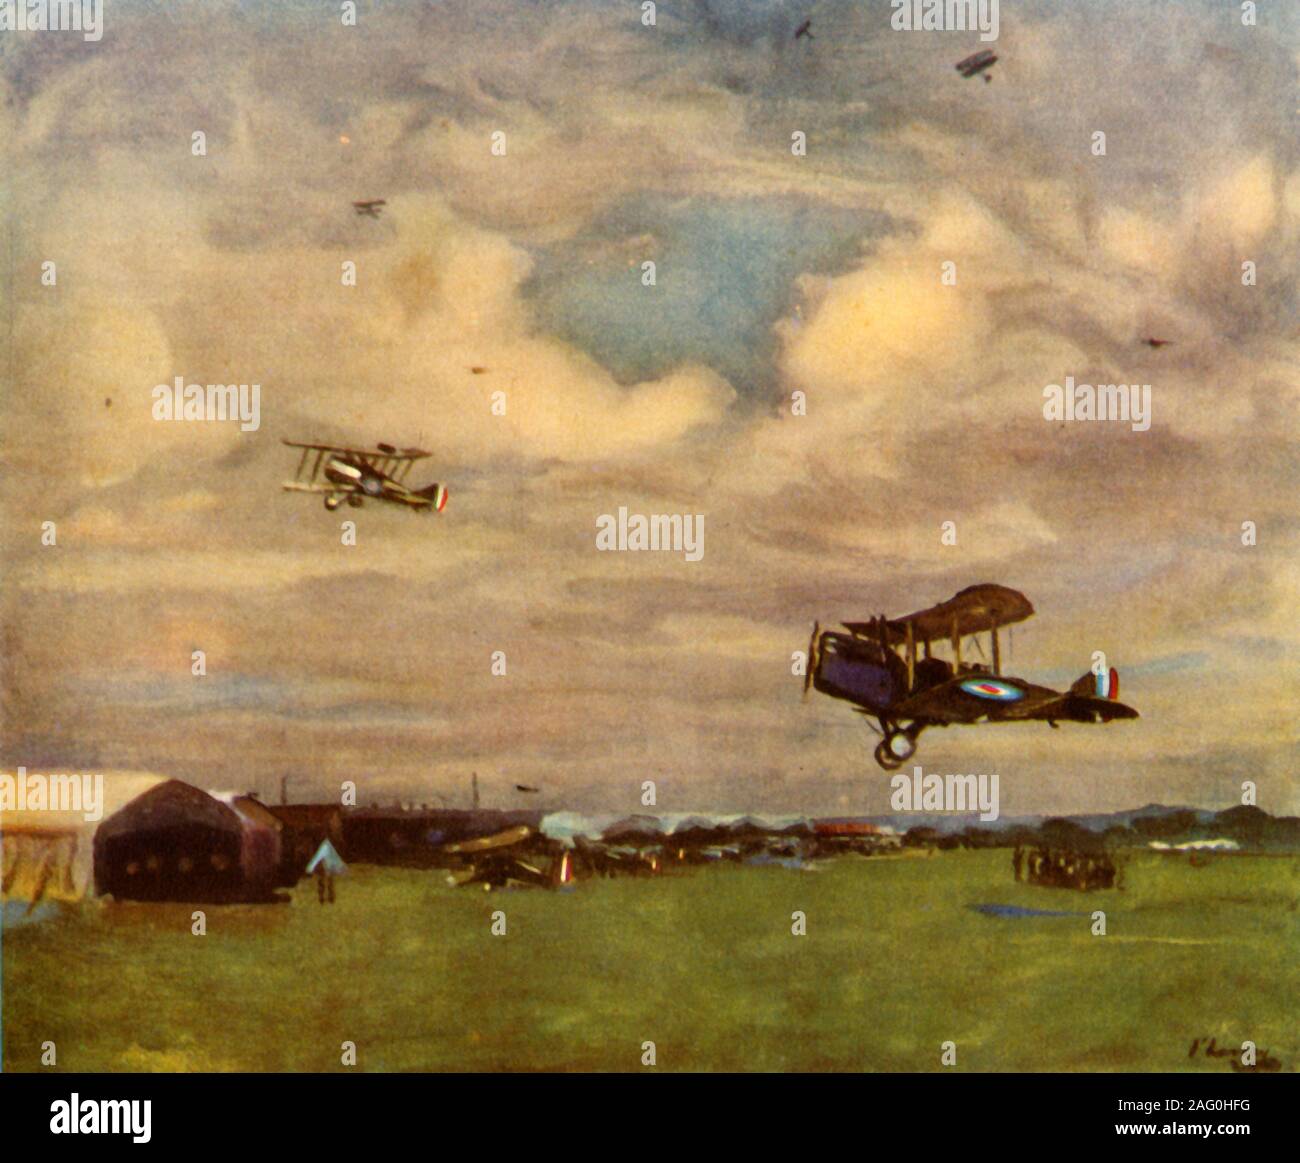 'An Aerodrome in 1918', (1944). British biplanes in the air over an airfield during the First World War. From &quot;Britain In The Air&quot;, by Nigel Tangye. [Collins, London, 1944] Stock Photo